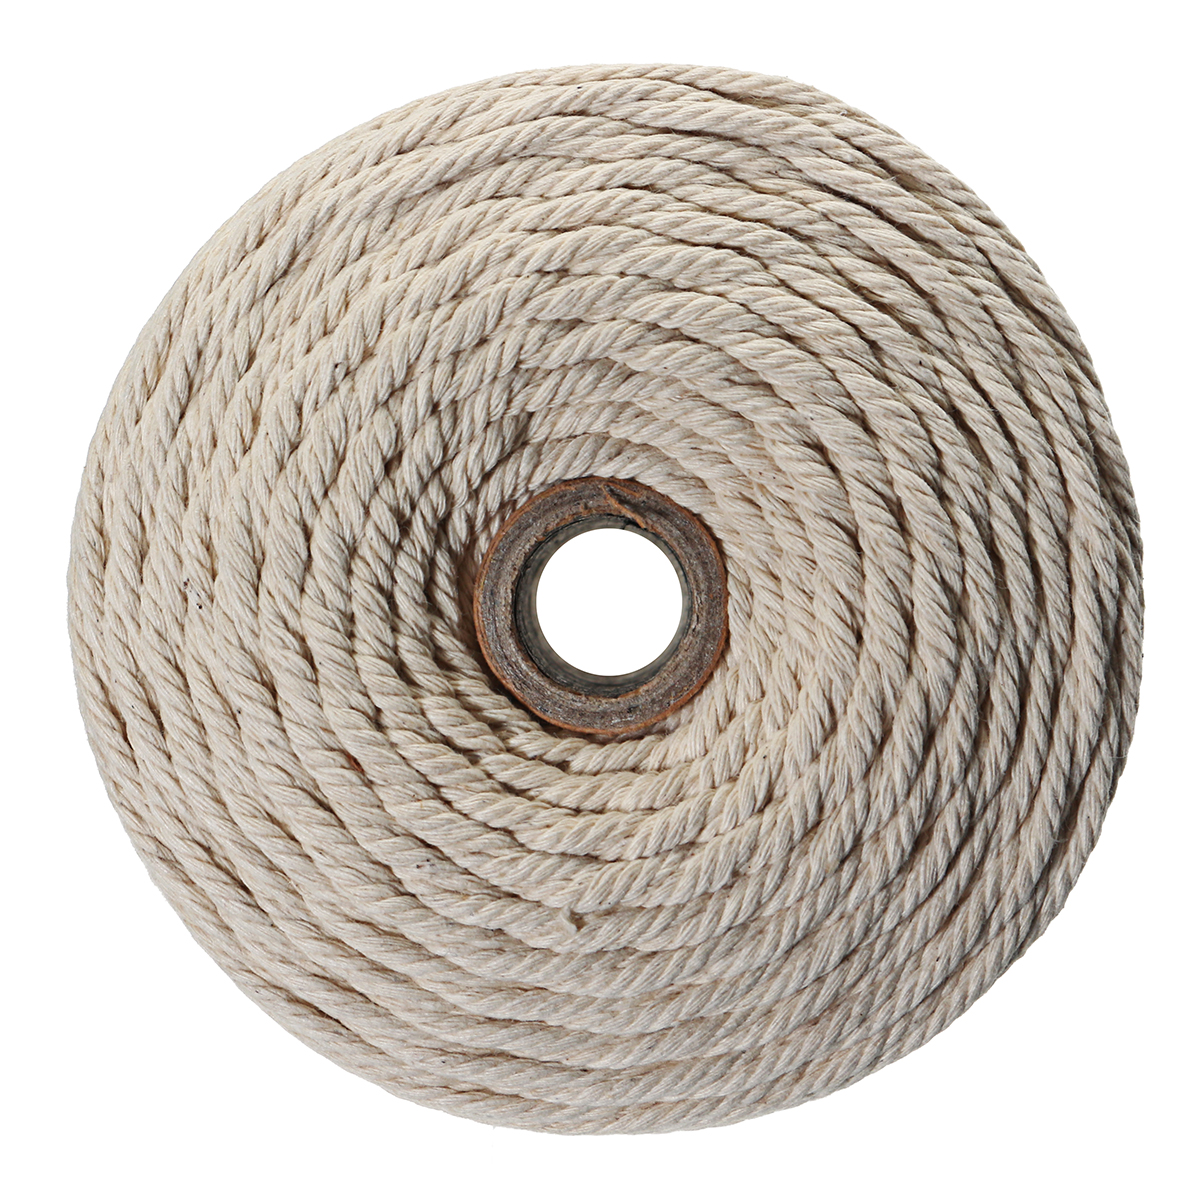 5Pcs-200Mx3mm-Natural-Beige-Cotton-Twisted-Cord-Rope-Braided-Wire-DIY-Craft-Macrame-String-1396554-5